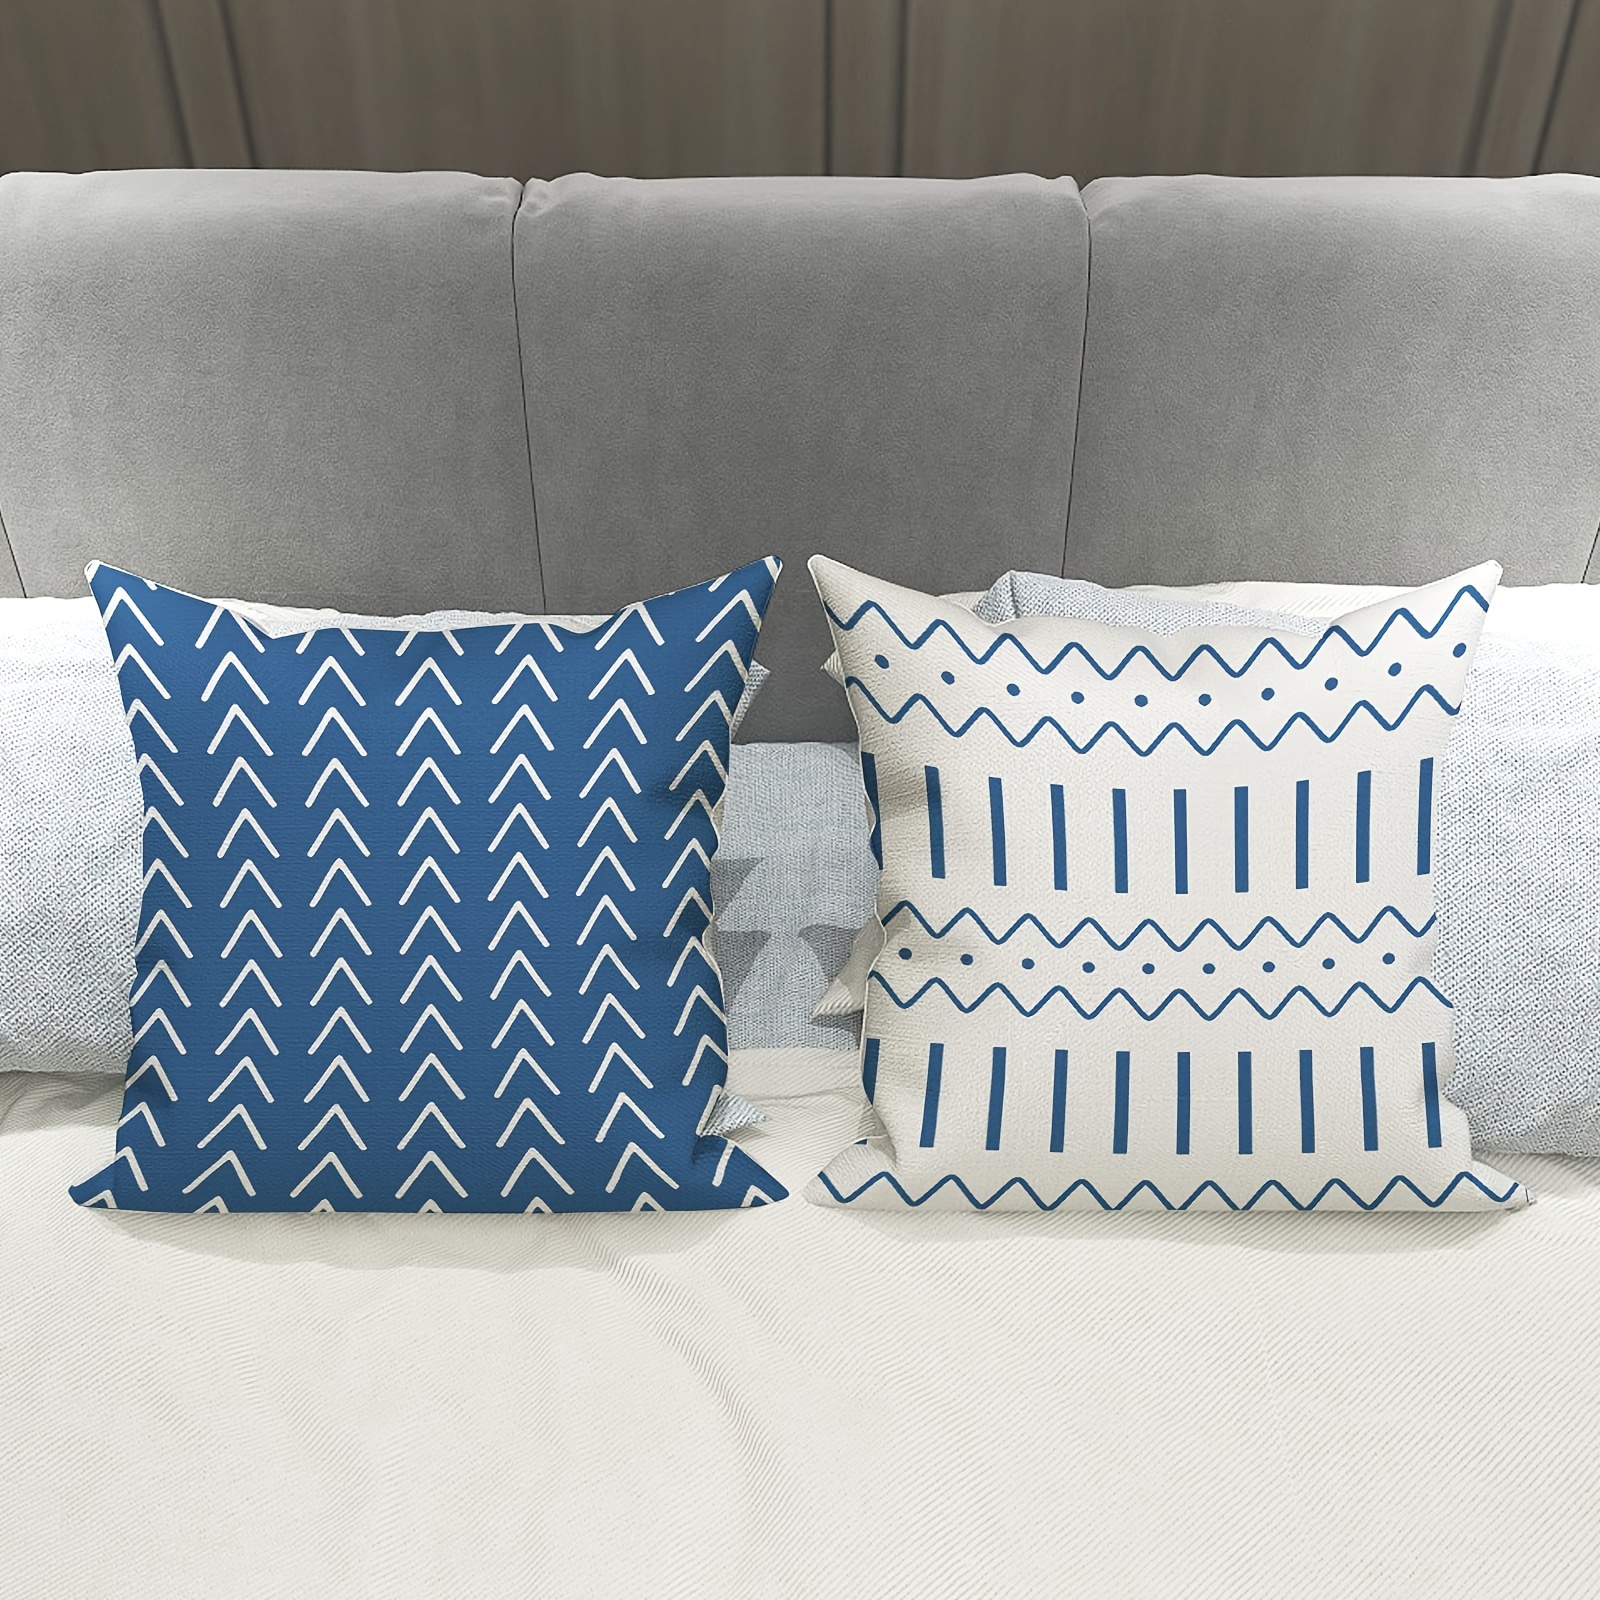 Aqua Blue Throw Pillow Covers 18x18 Set of 4 Decorative Geometric Pillow Case Outdoor Sofa Pillow Cushion Covers for Couch Living Room Bed Patio